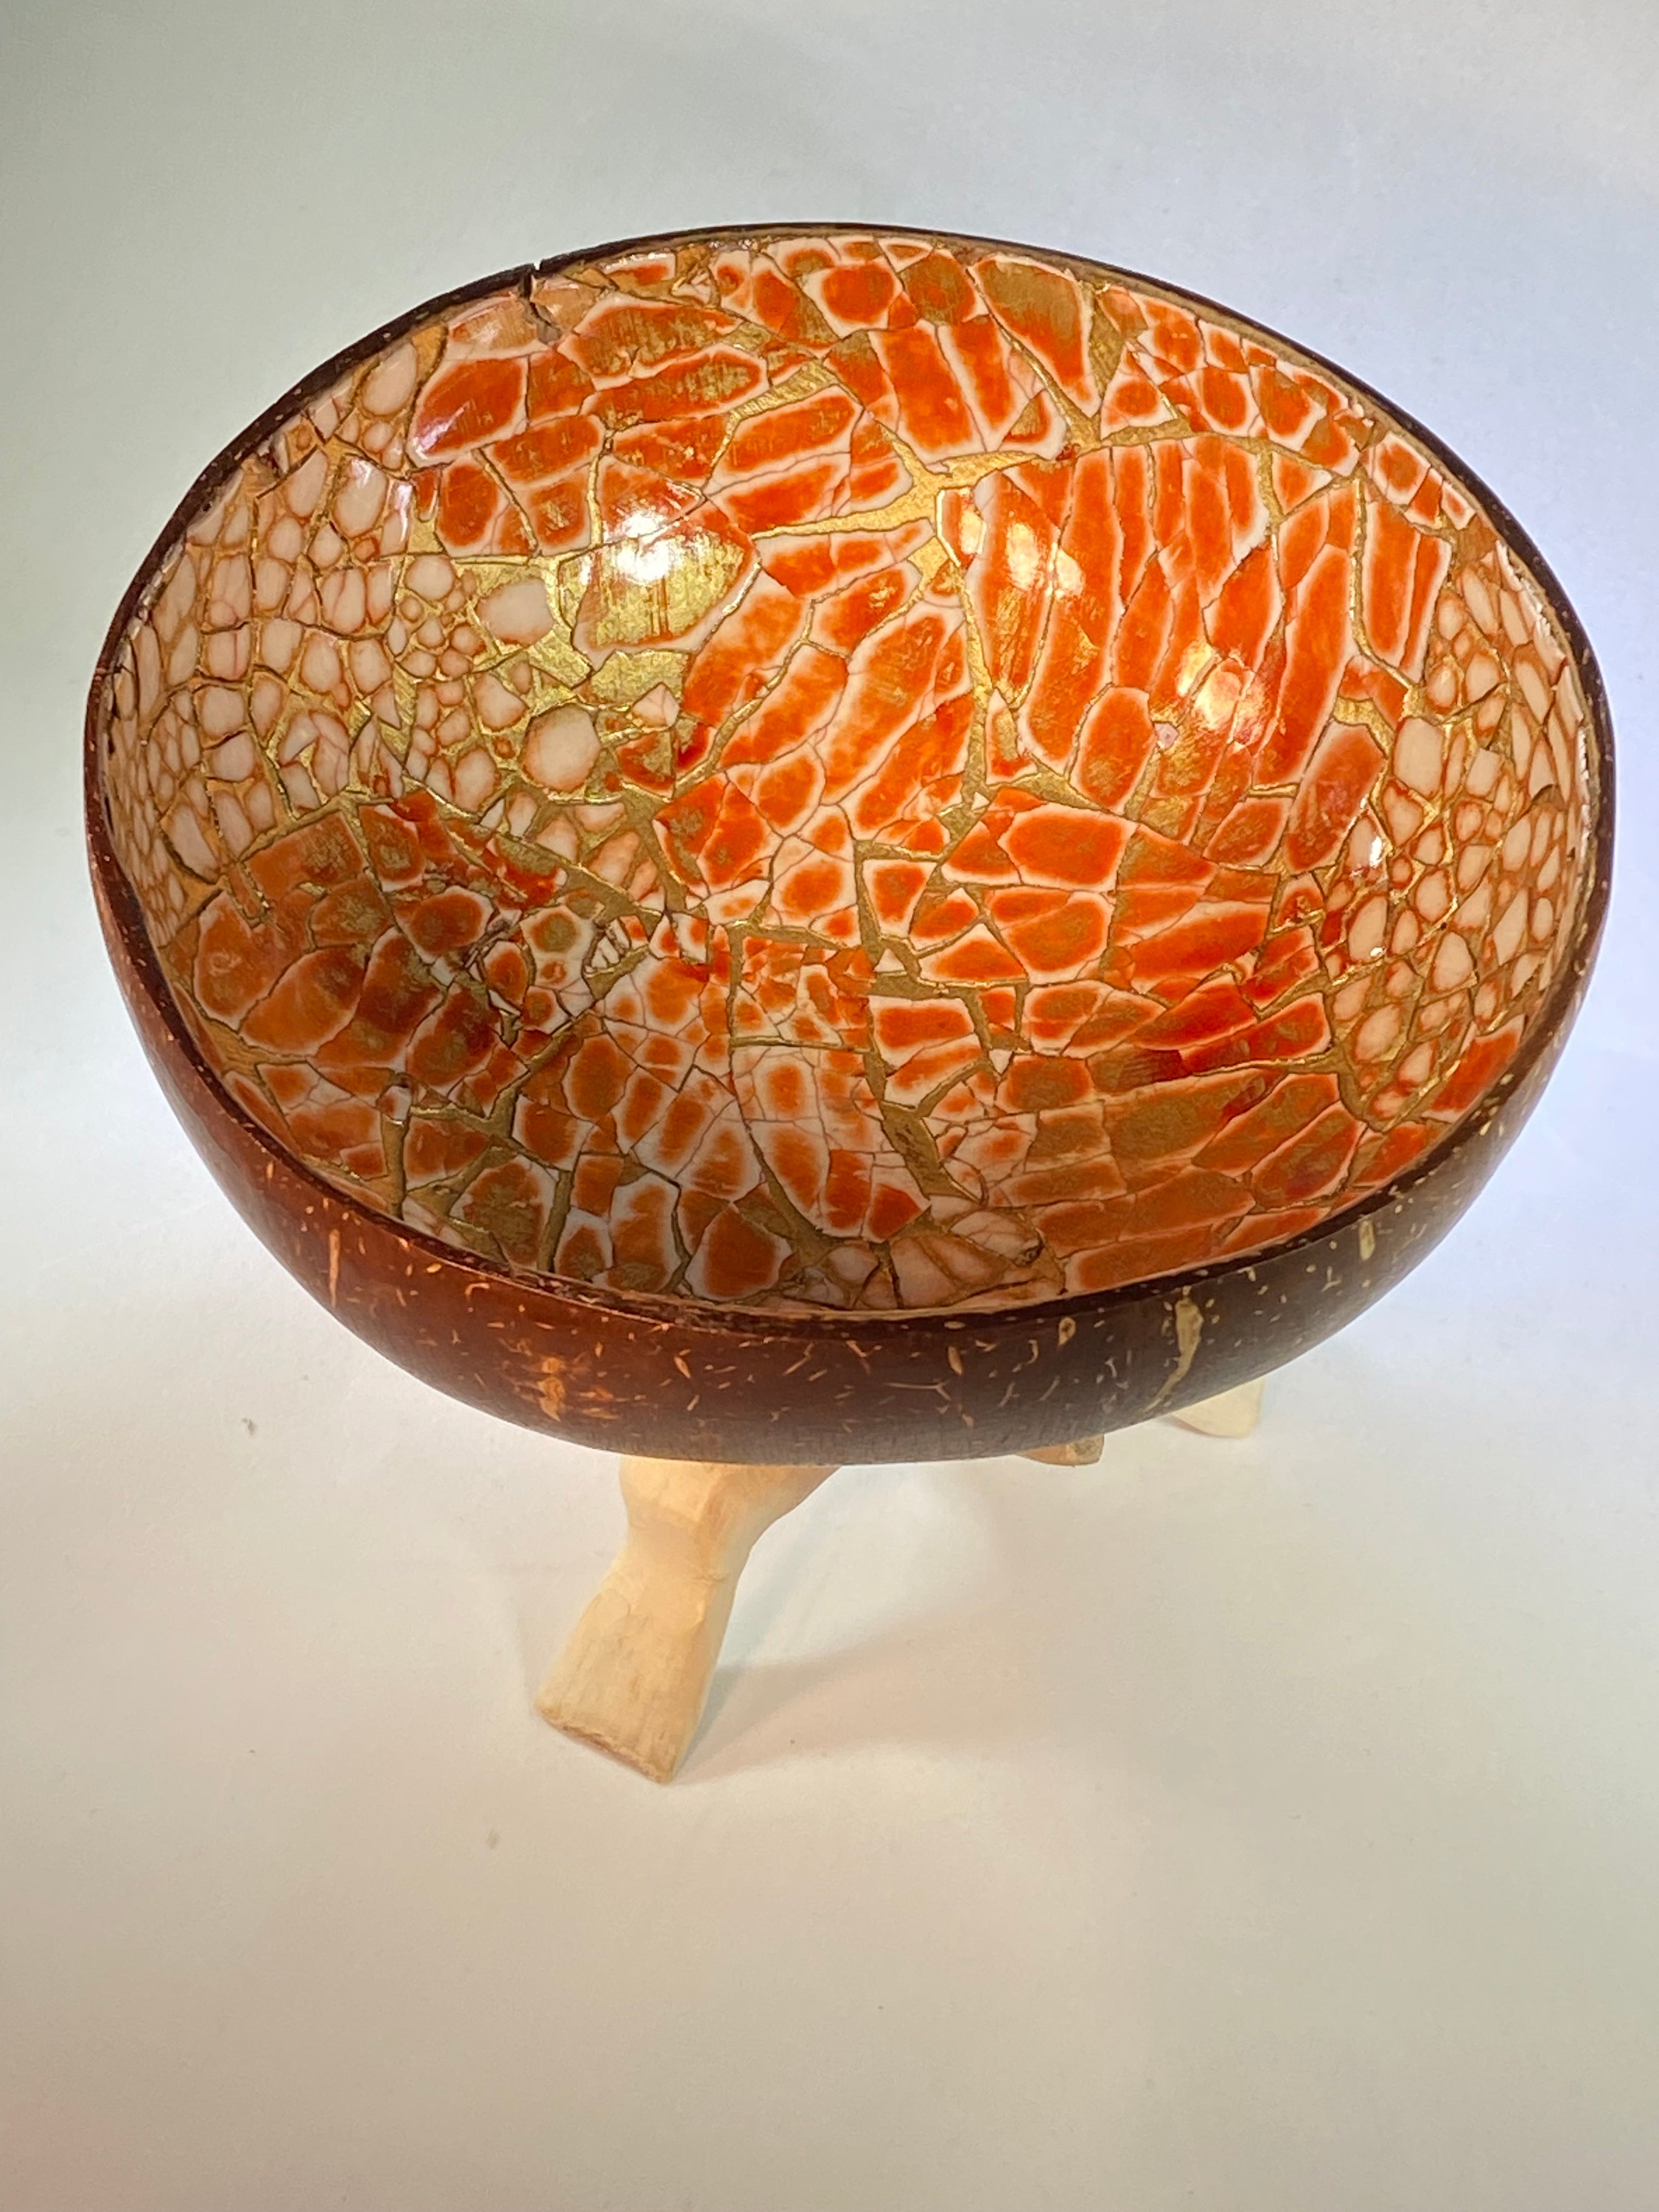 Coconut shell bowl Orange and Gold